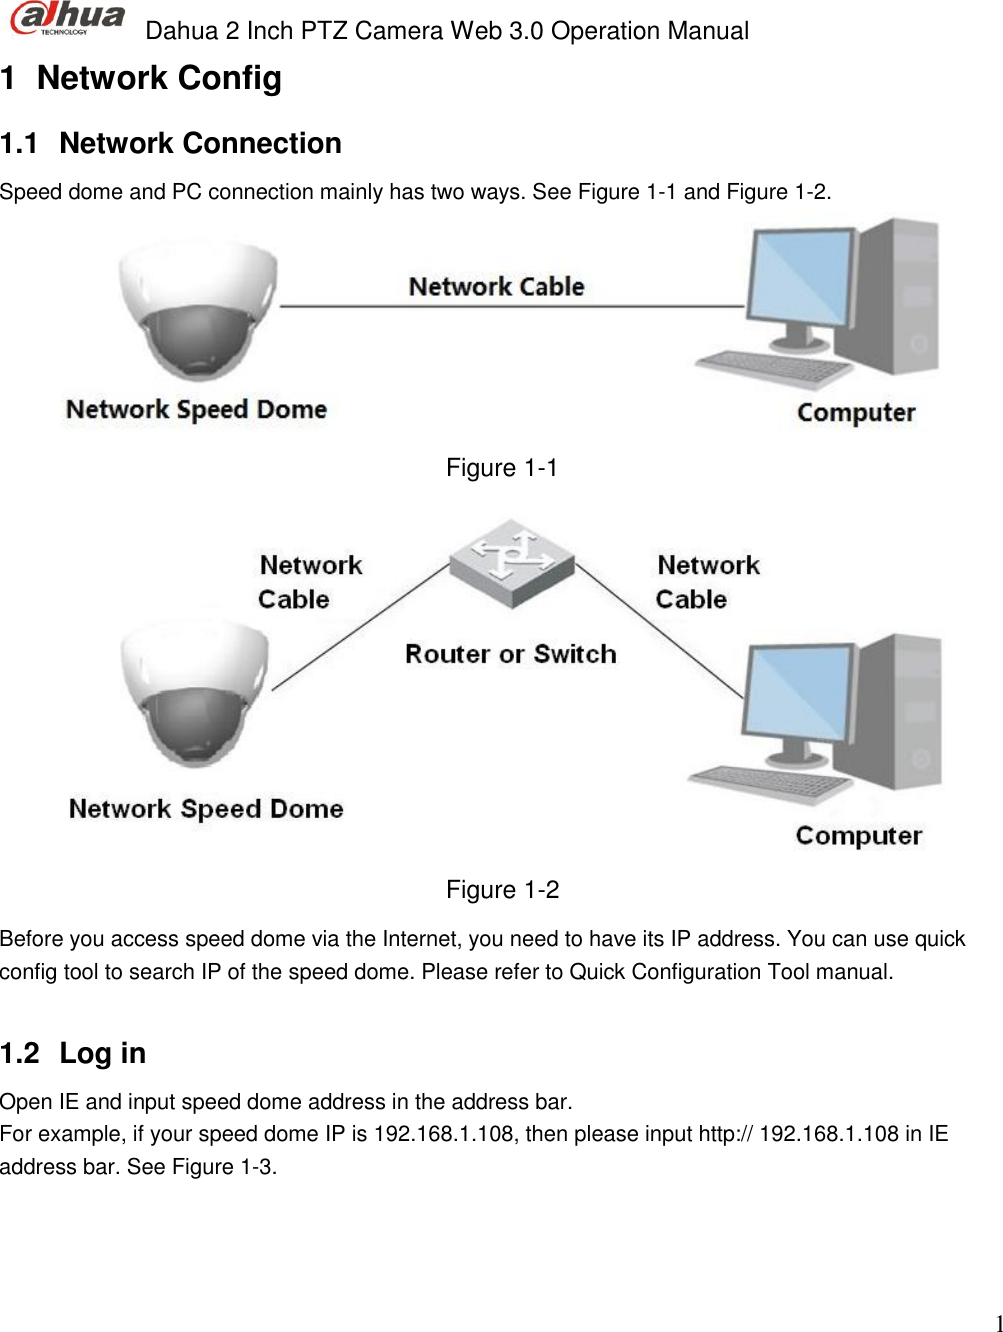  Dahua 2 Inch PTZ Camera Web 3.0 Operation Manual                                                                             1 1  Network Config 1.1  Network Connection Speed dome and PC connection mainly has two ways. See Figure 1-1 and Figure 1-2.  Figure 1-1  Figure 1-2 Before you access speed dome via the Internet, you need to have its IP address. You can use quick config tool to search IP of the speed dome. Please refer to Quick Configuration Tool manual.   1.2  Log in  Open IE and input speed dome address in the address bar.  For example, if your speed dome IP is 192.168.1.108, then please input http:// 192.168.1.108 in IE address bar. See Figure 1-3.  